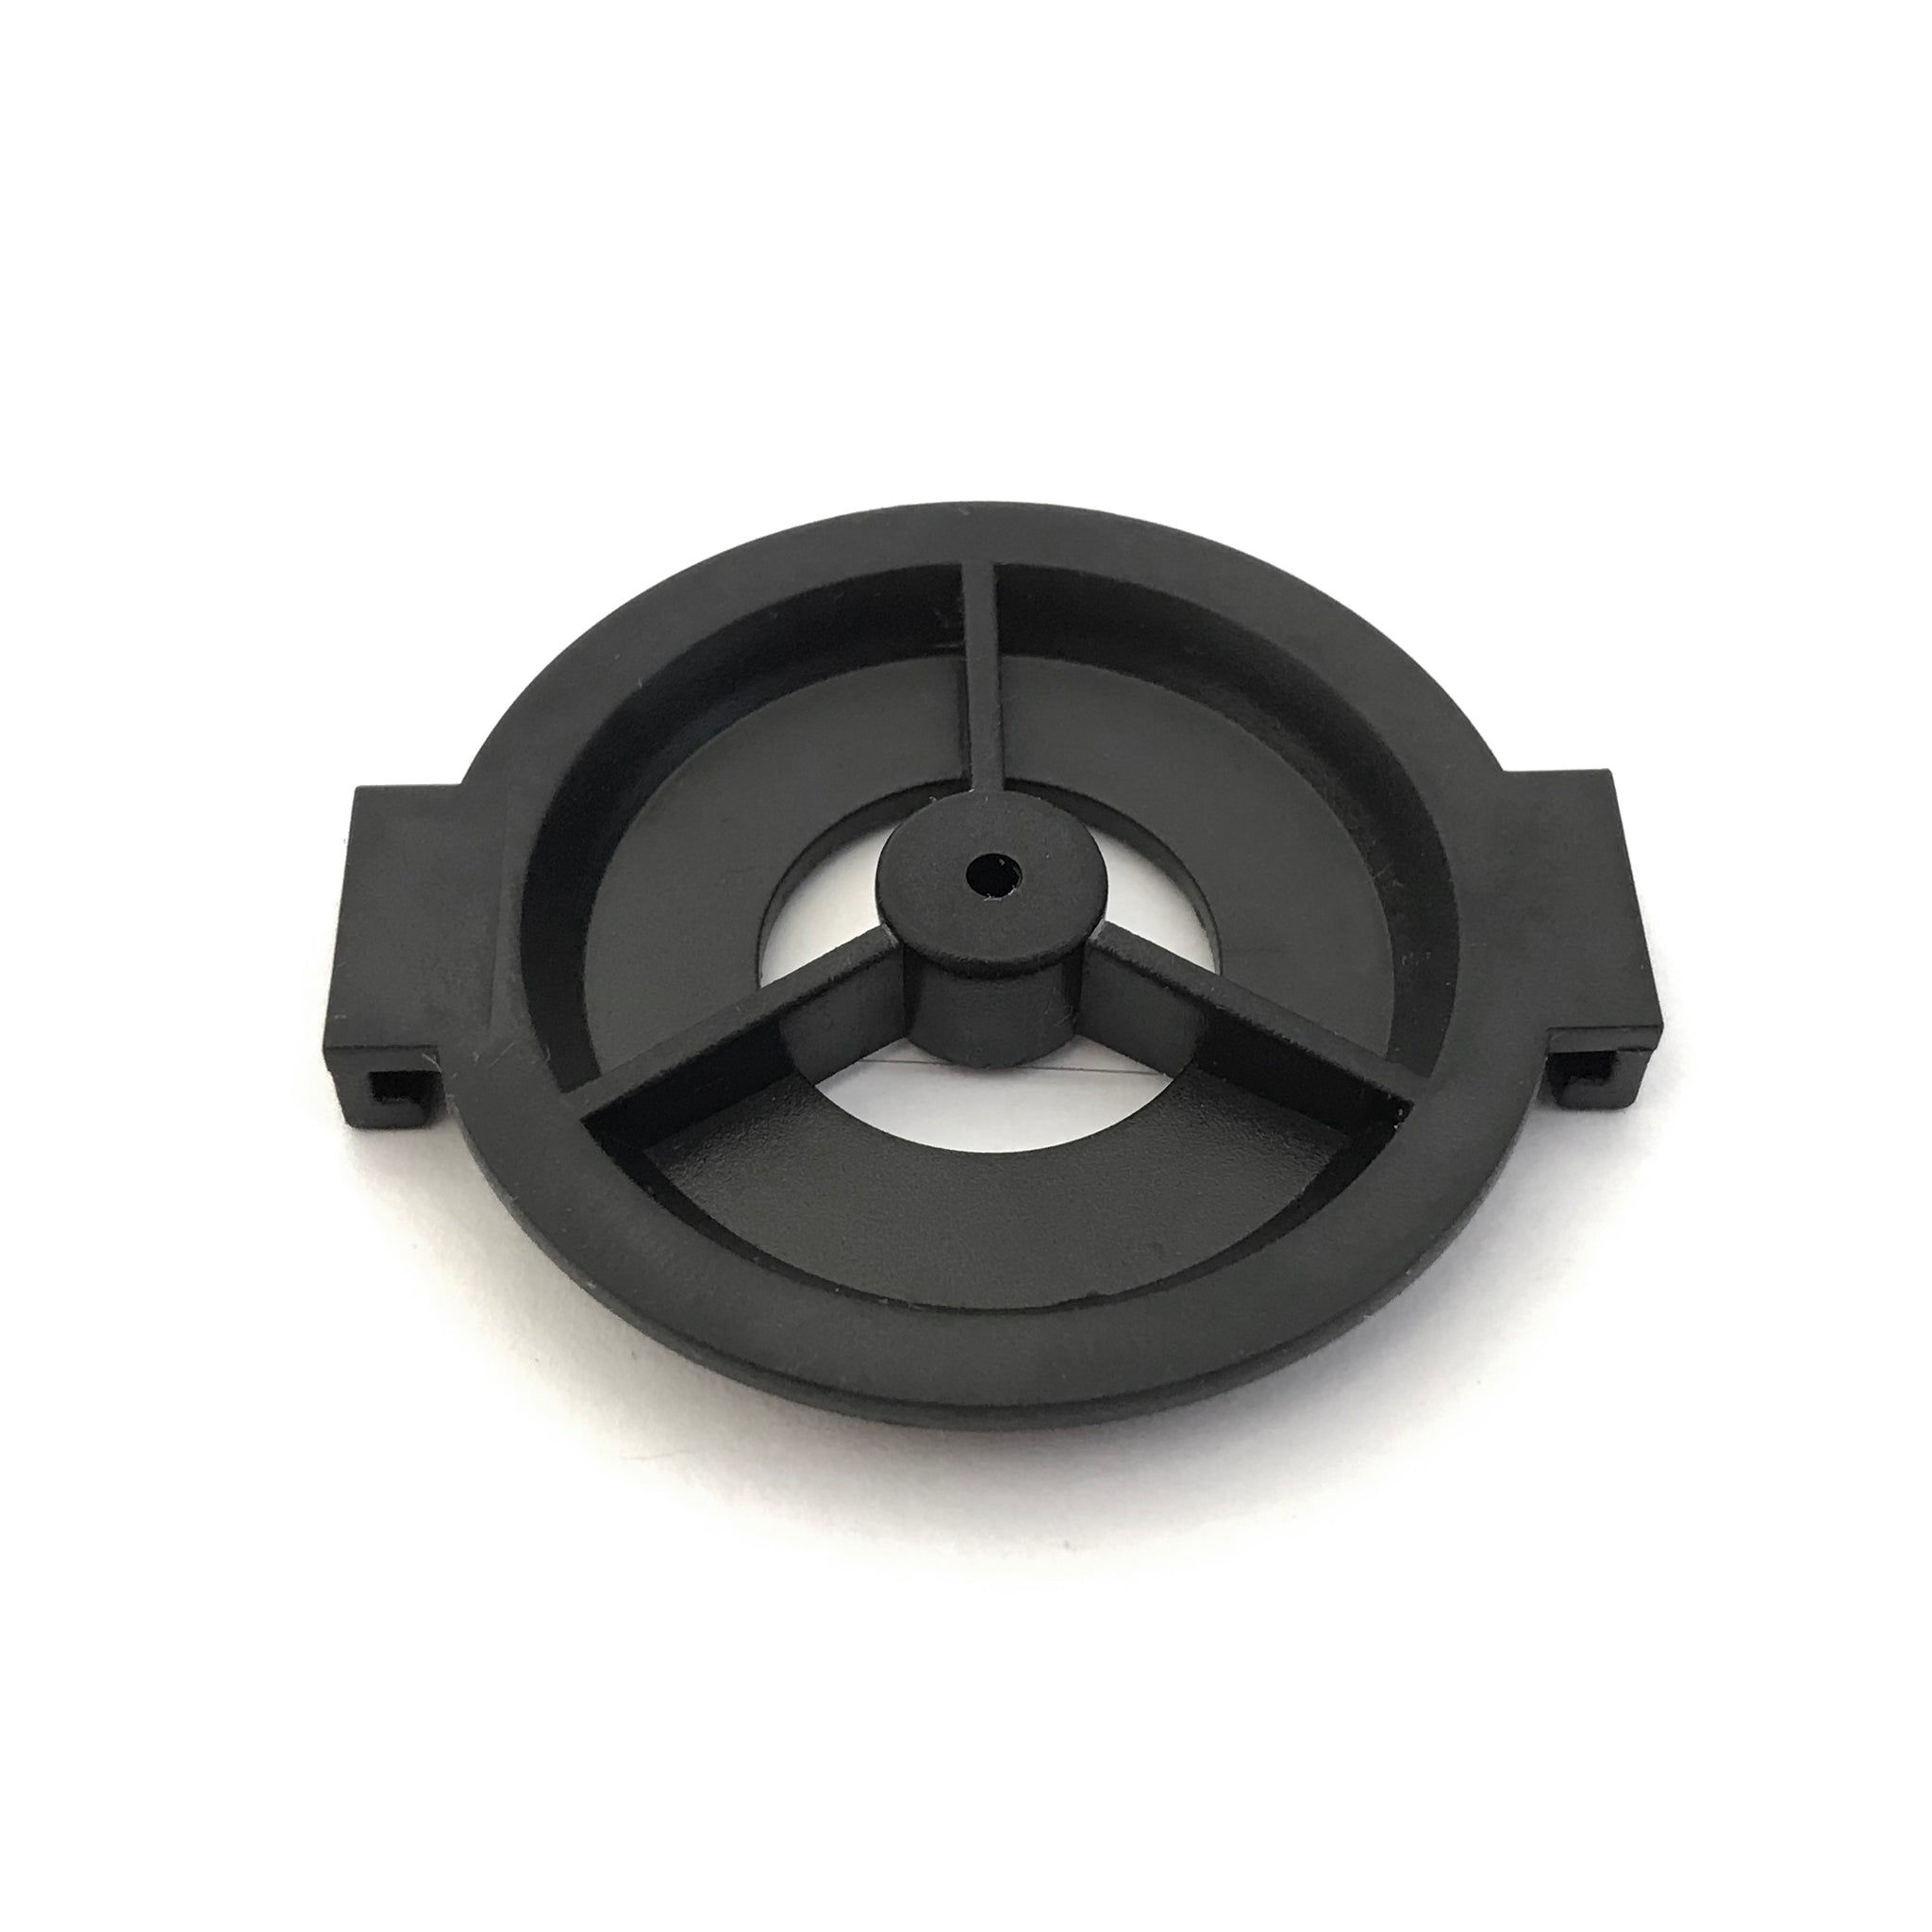 REPLACEMENT IMPELLER COVER & SEAL FOR SP-200